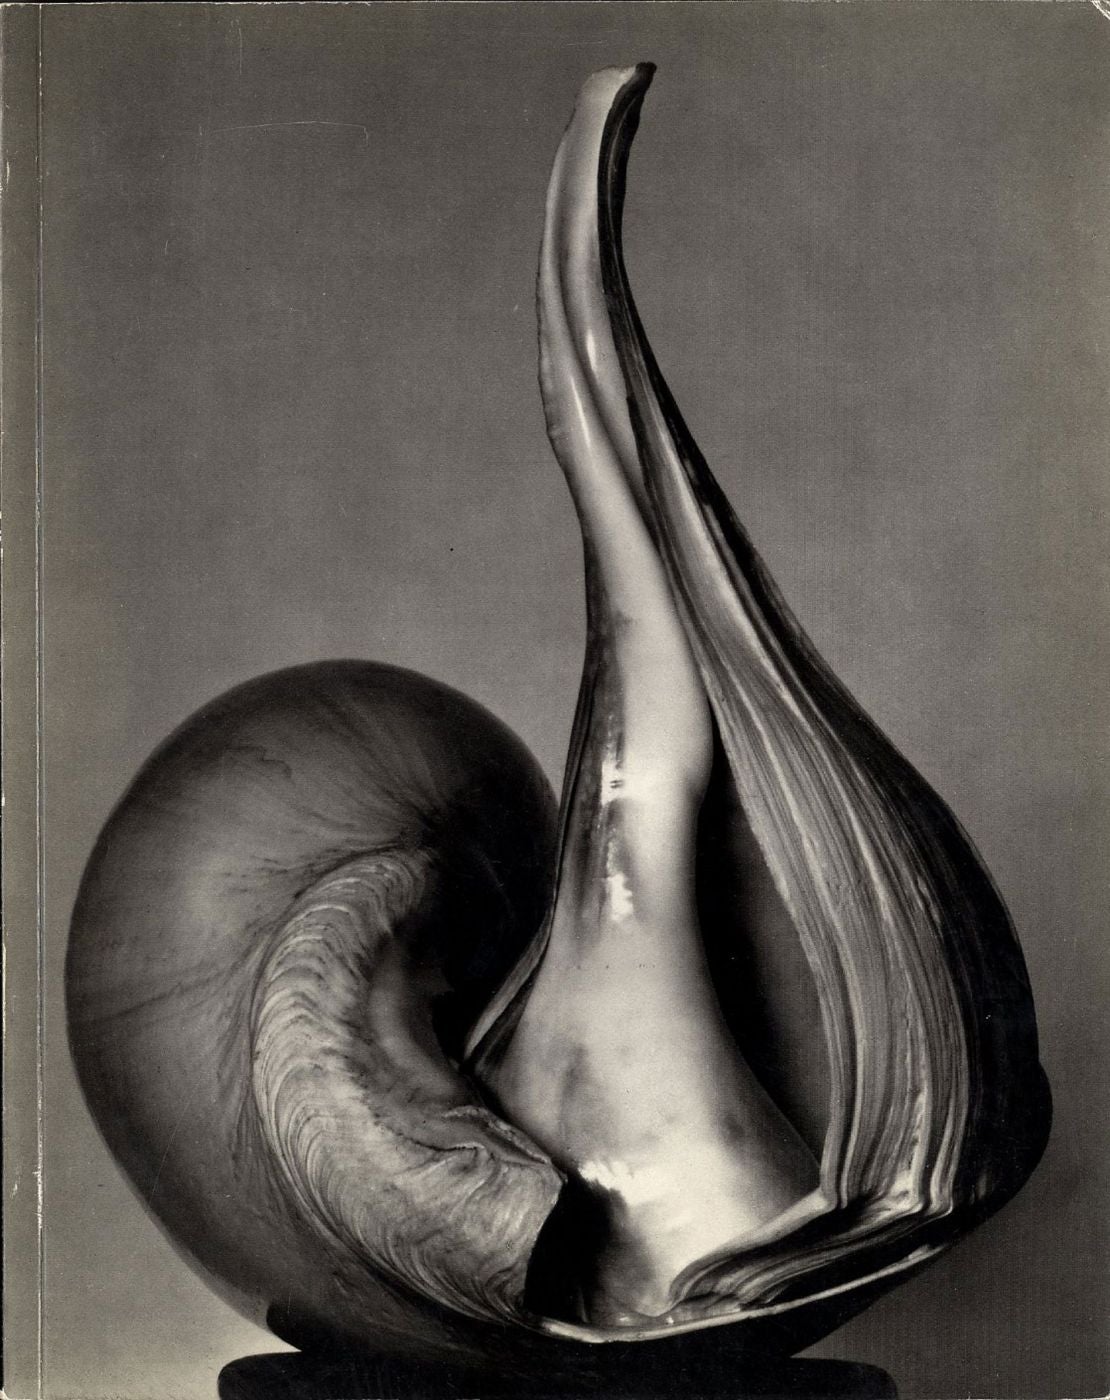 Untitled 41 (The Friends of Photography): EW 100: Centennial Essays in Honor of Edward Weston